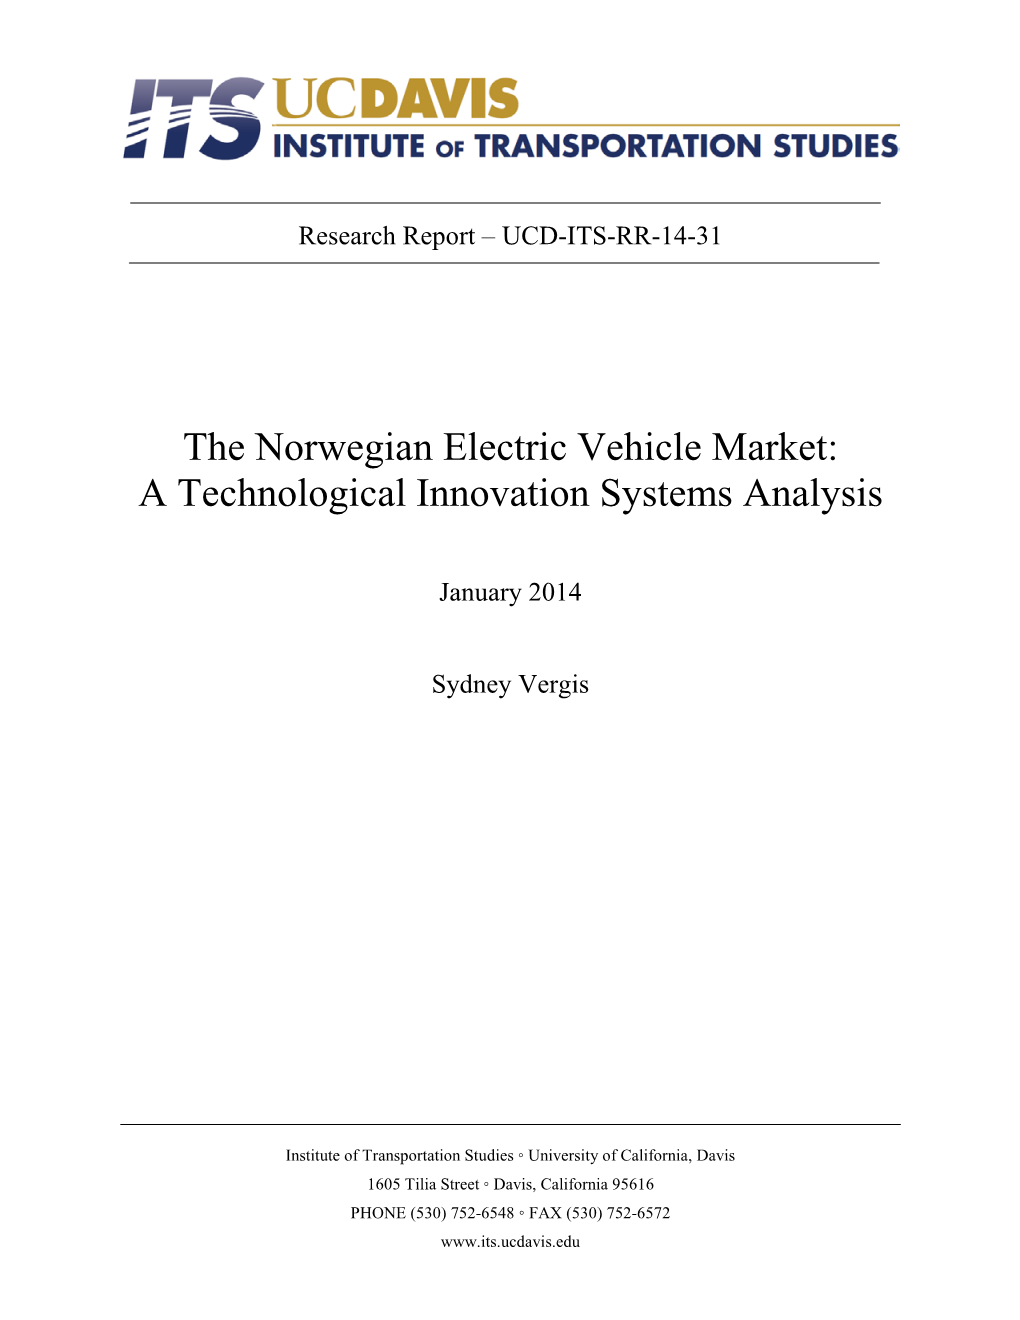 The Norwegian Electric Vehicle Market: a Technological Innovation Systems Analysis